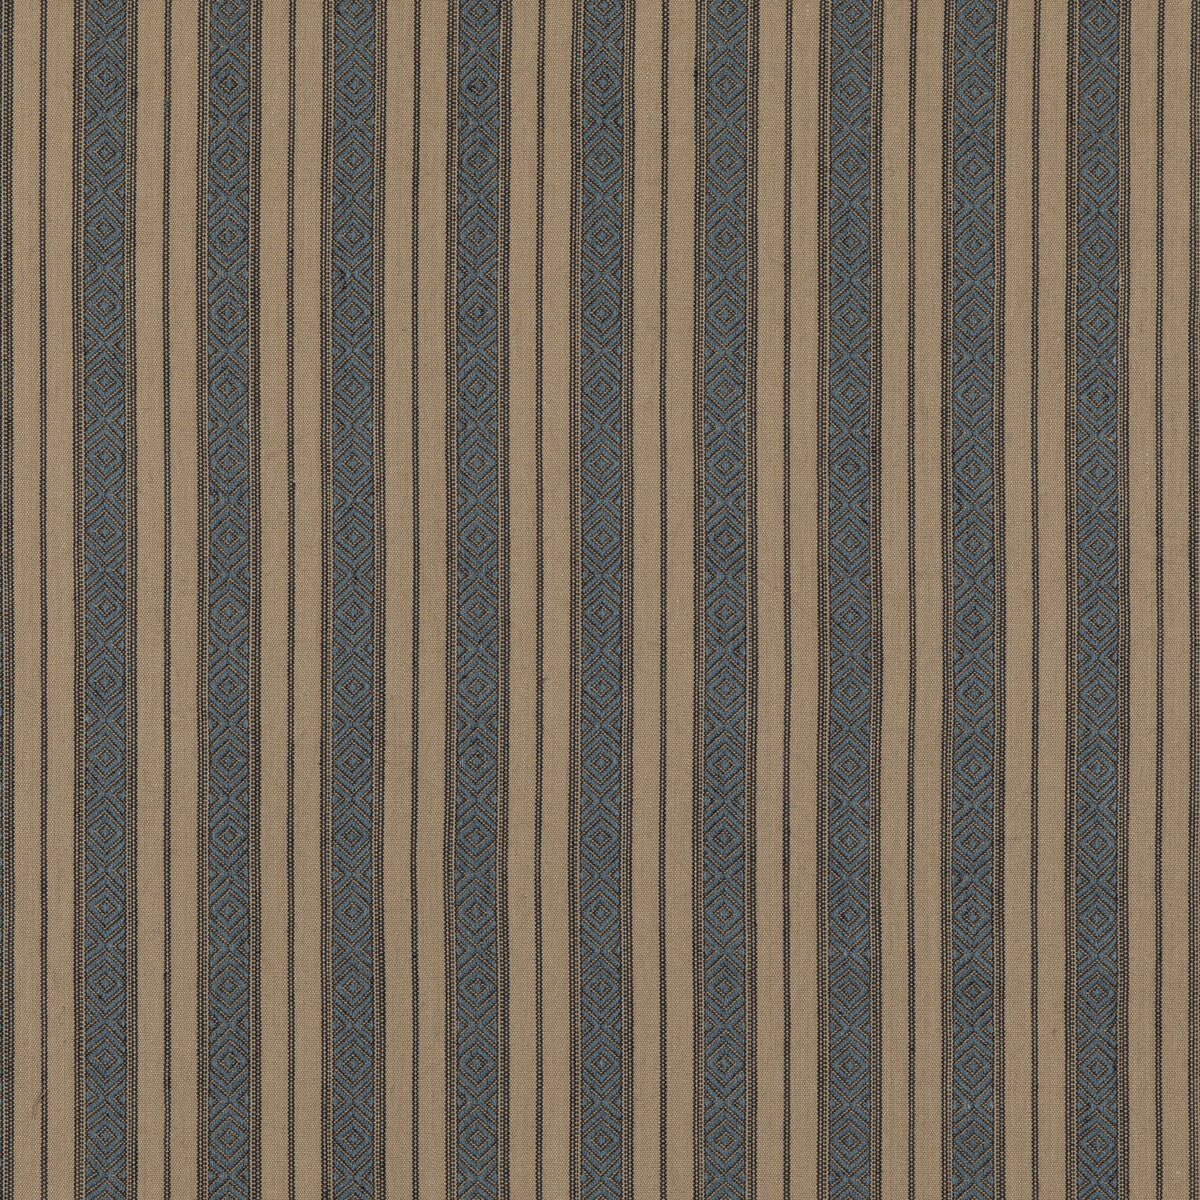 Cowdray Stripe fabric in denim color - pattern FD790.G34.0 - by Mulberry in the Mulberry Stripes II collection